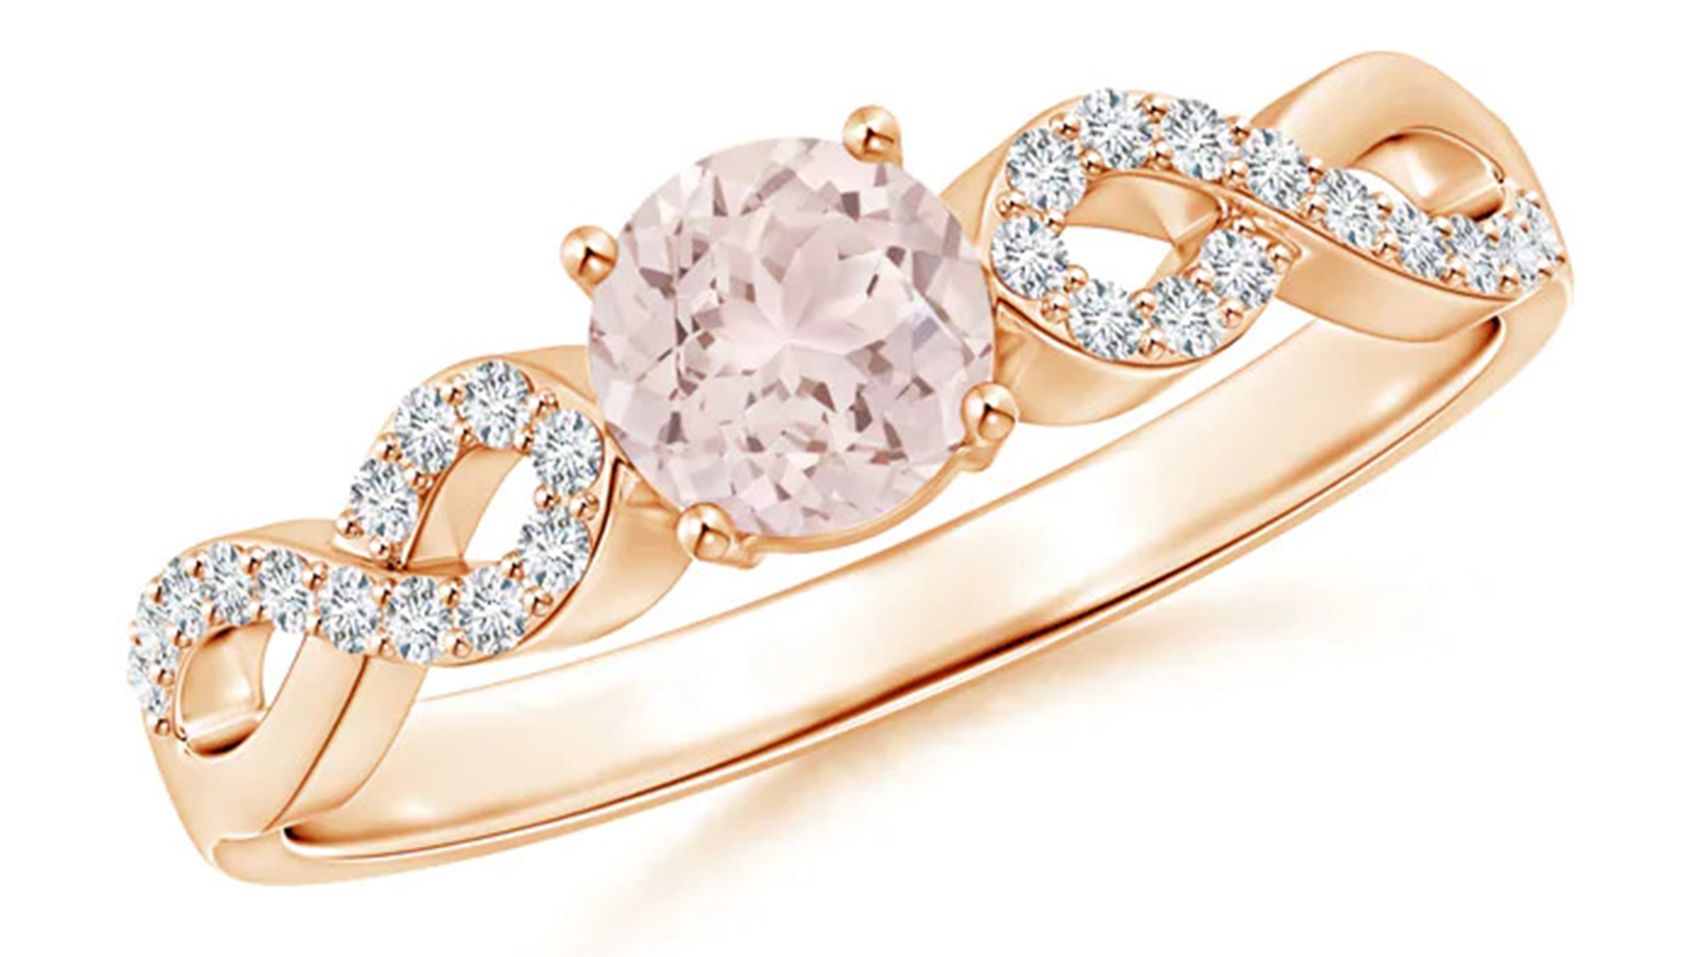 21 best rings the perfect proposal | CNN Underscored